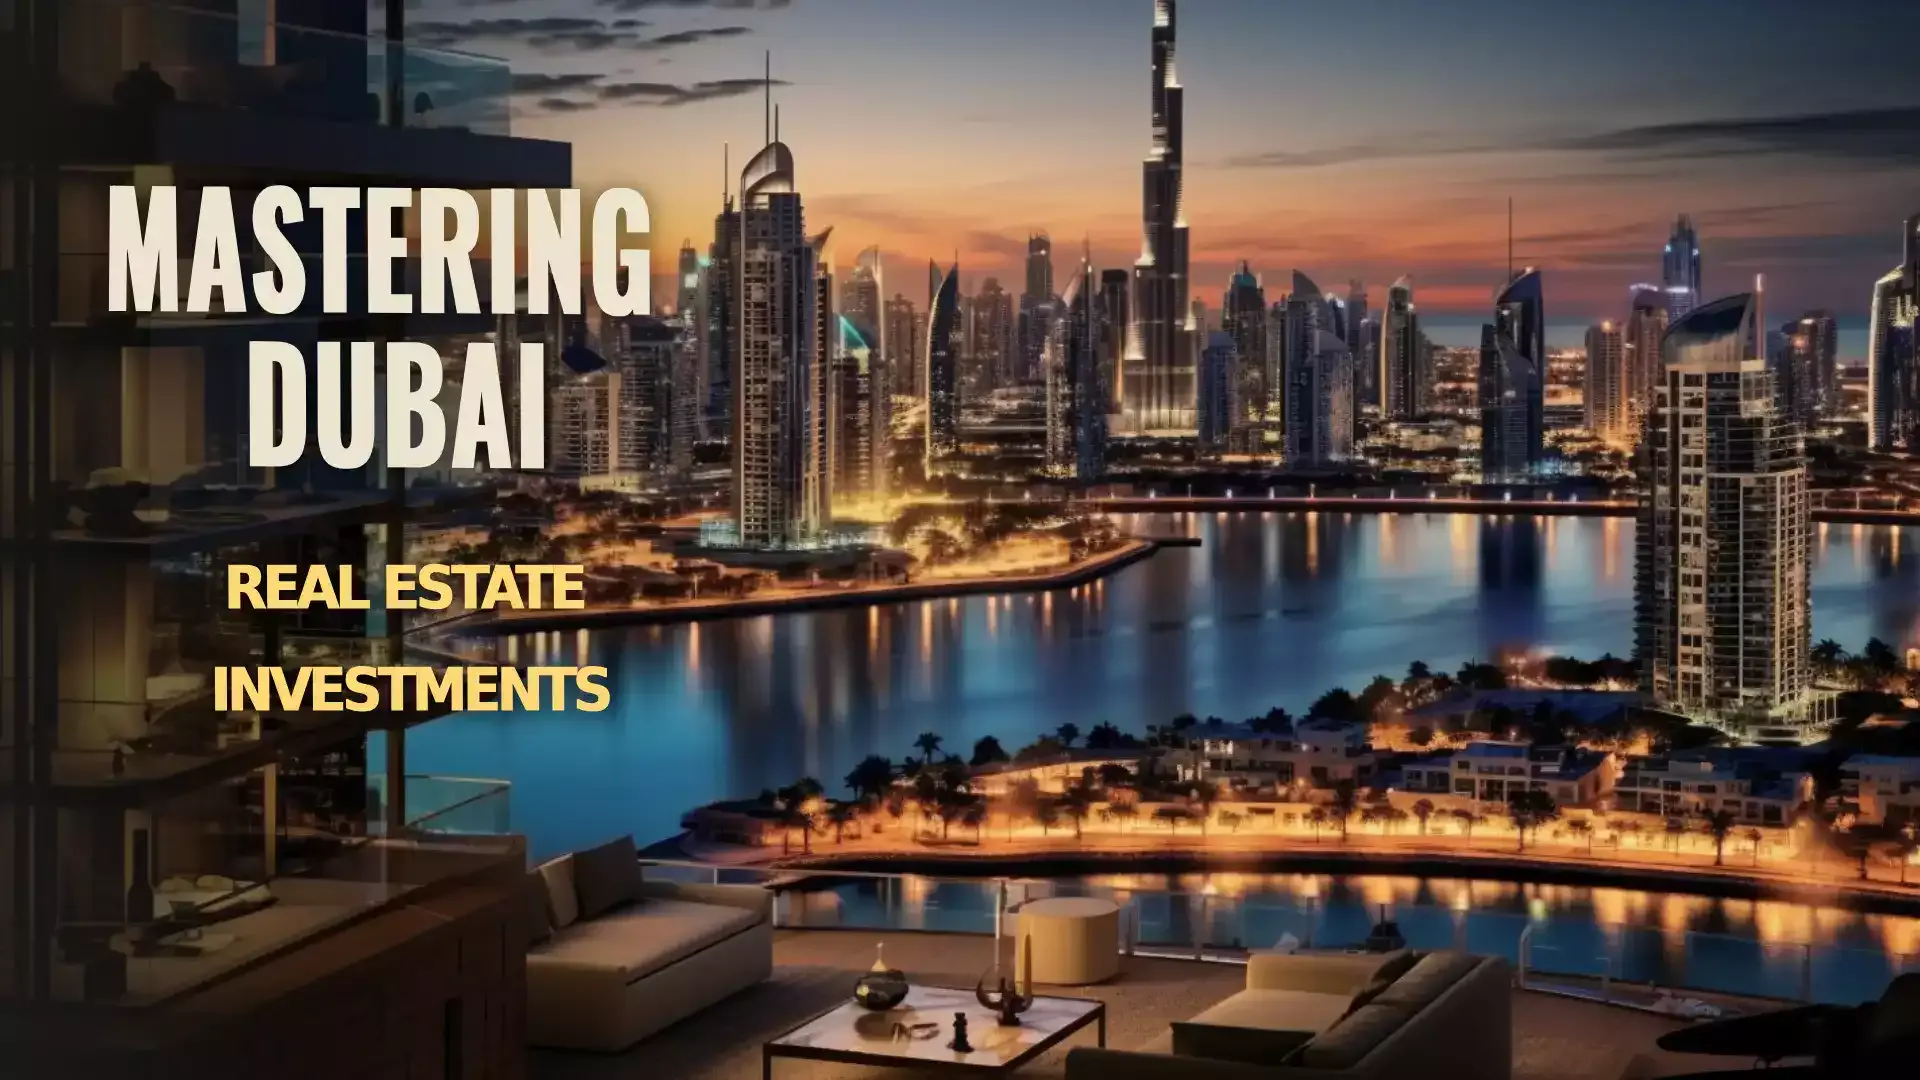 Image depicting the allure of Dubai real estate investments